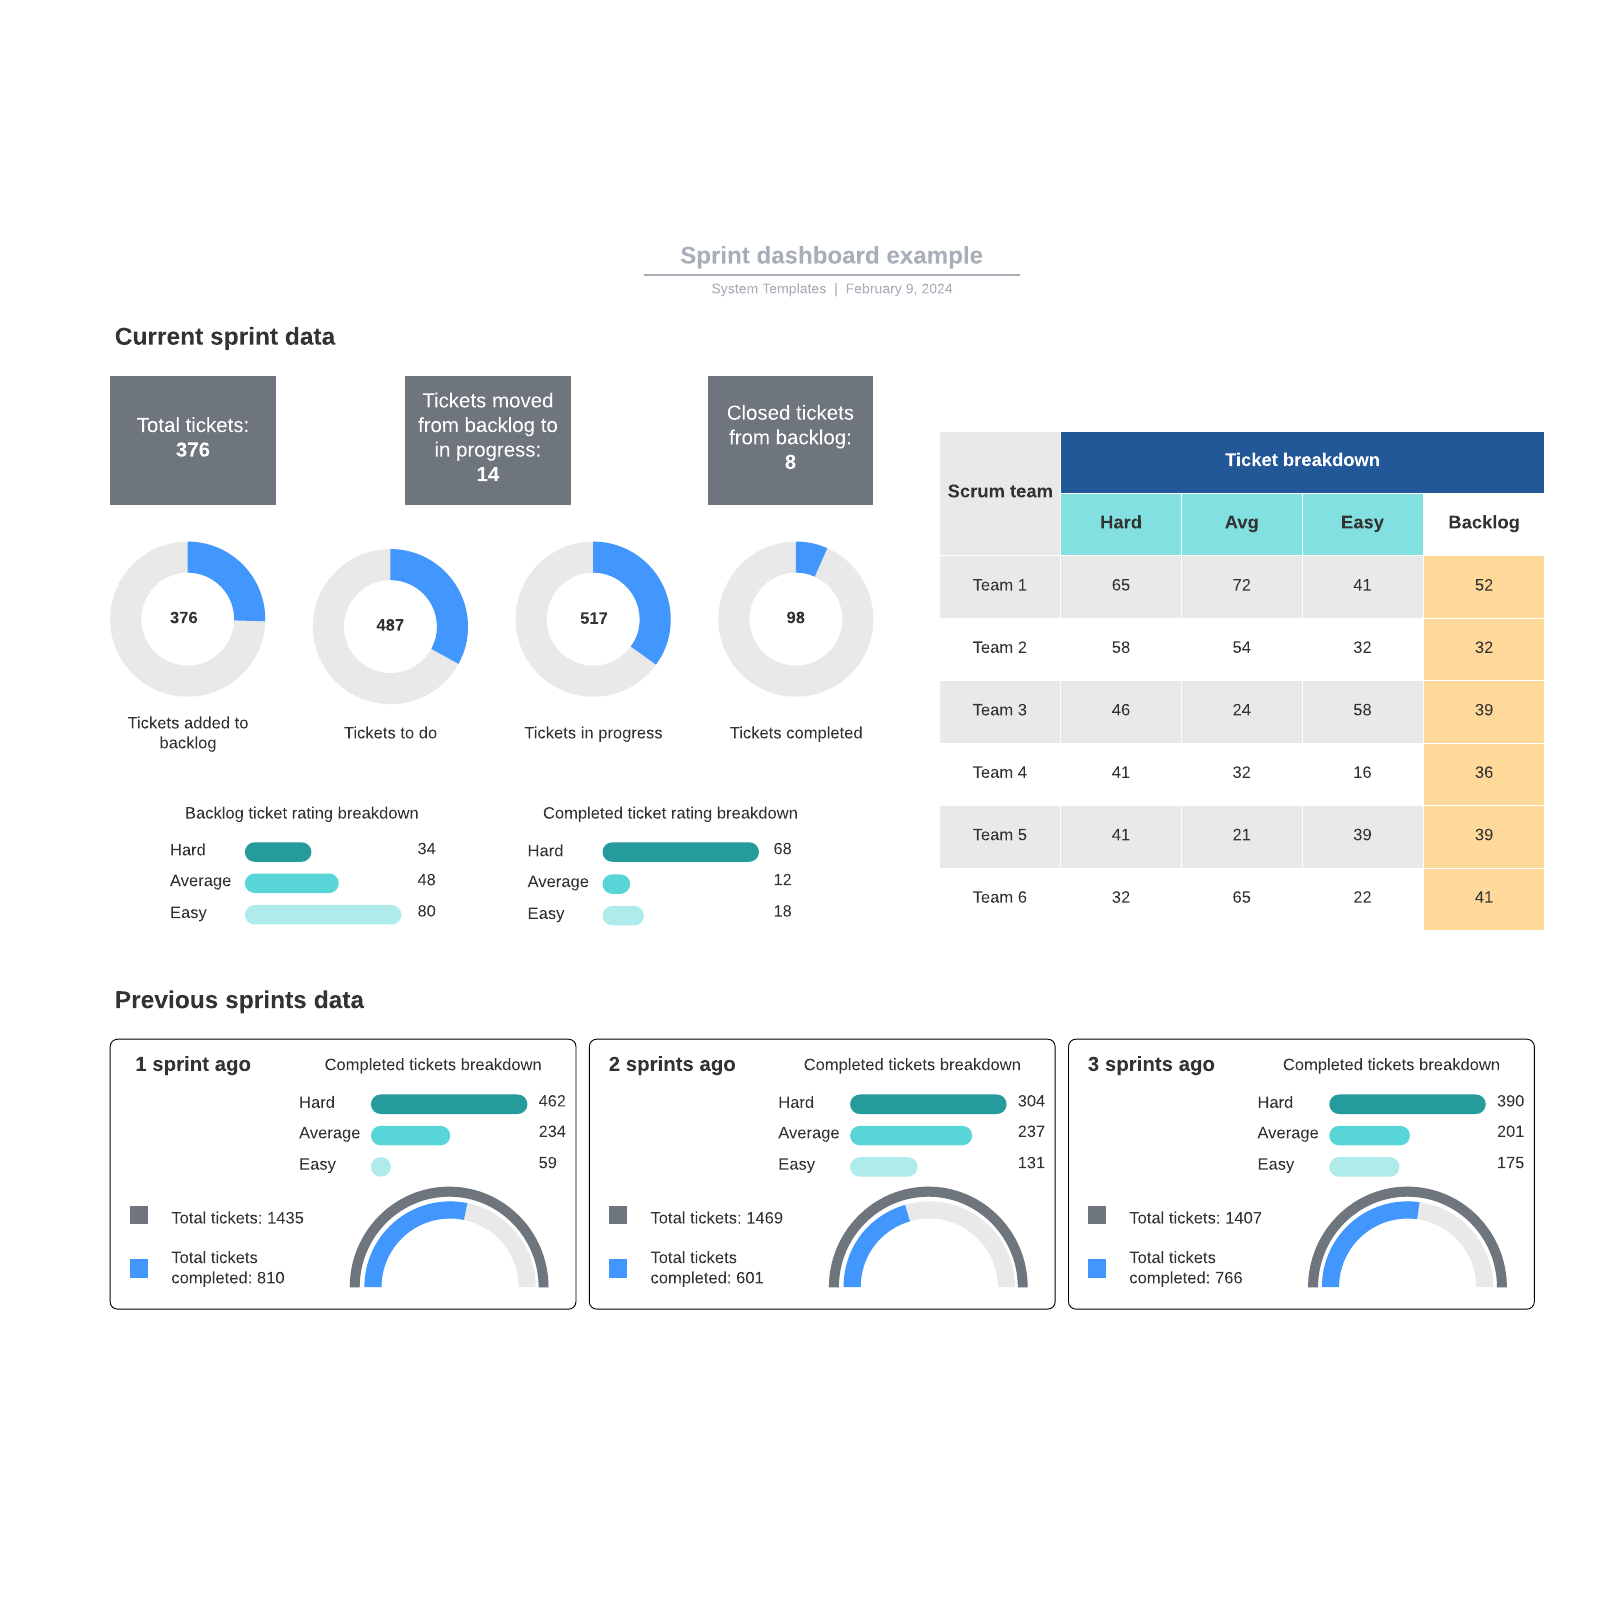 Sprint dashboard example example